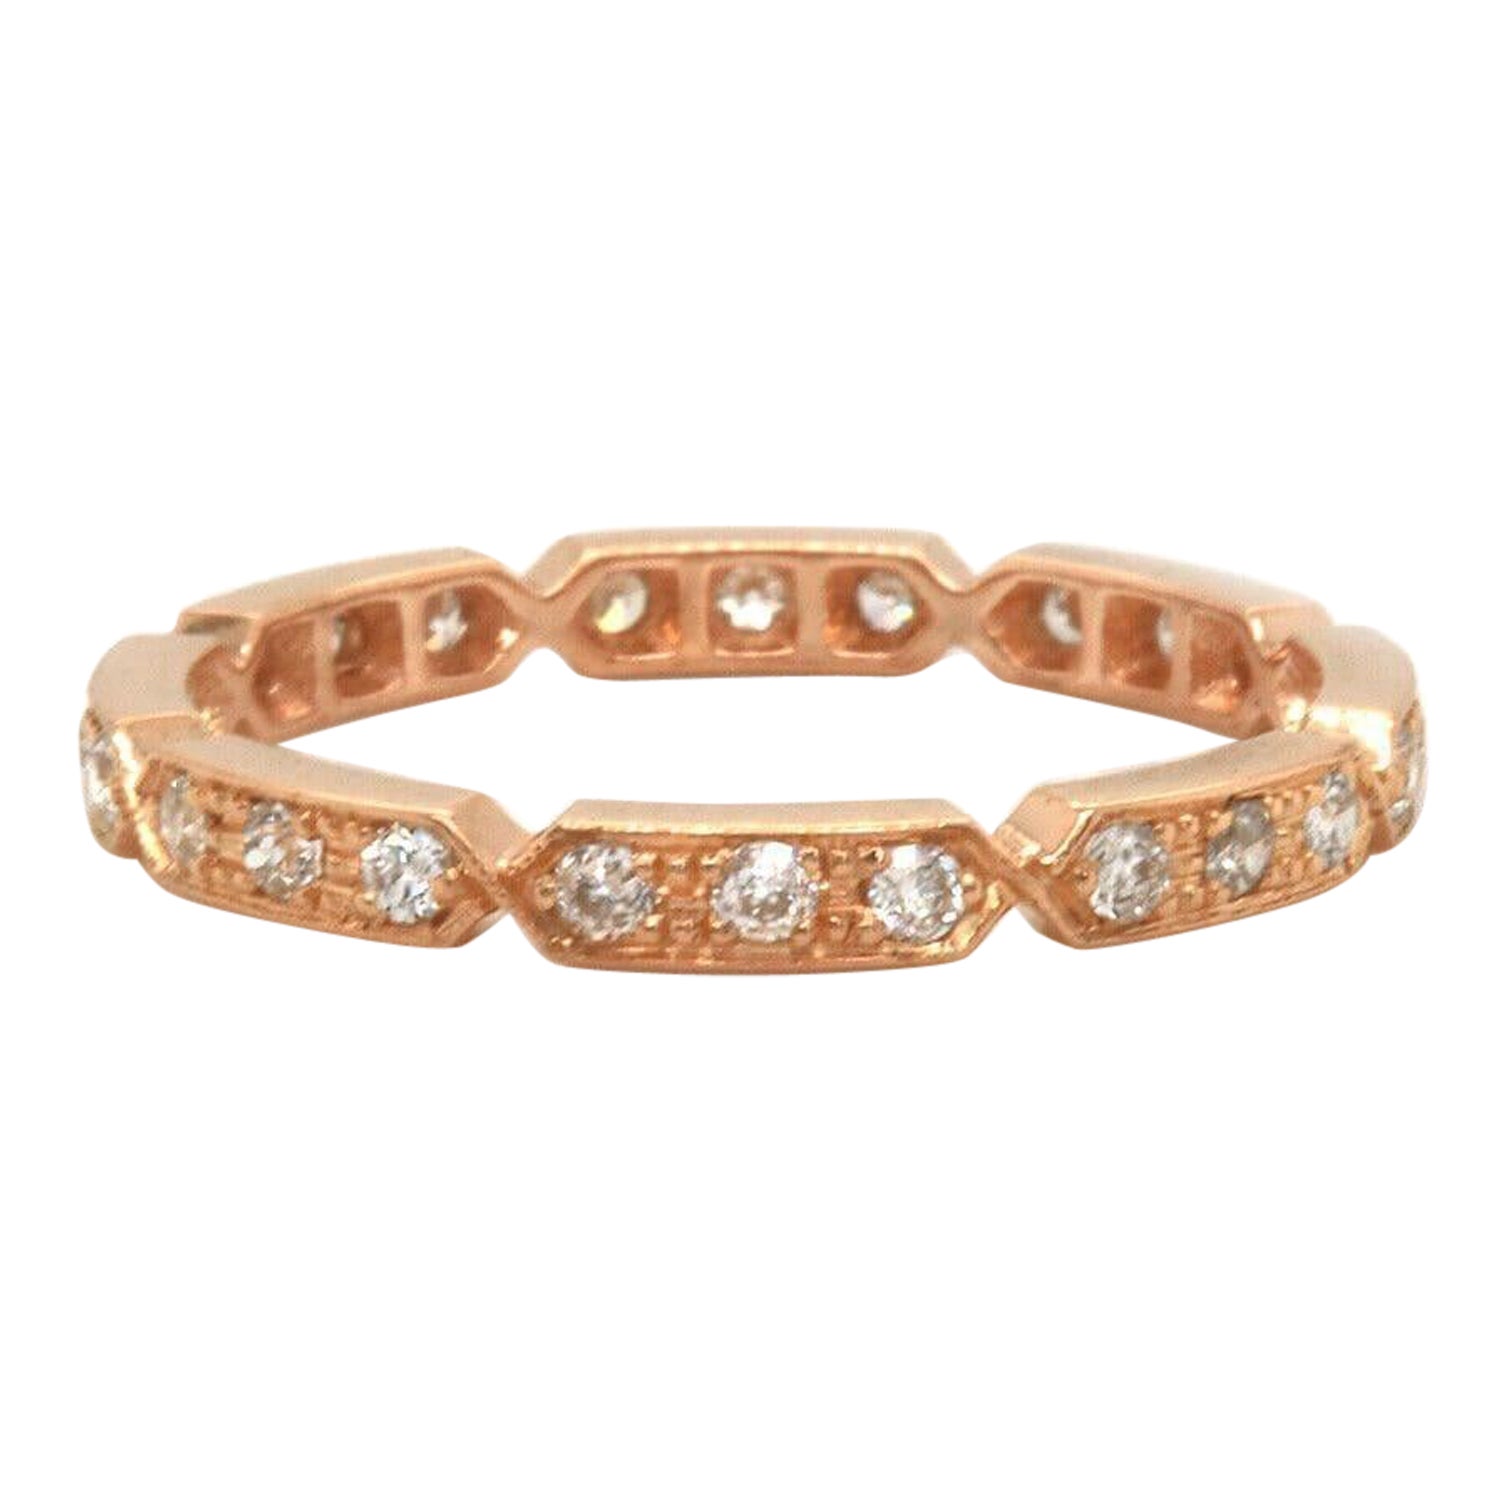 0.20ctw Diamond Octagonal Eternity Wedding Band Ring in 14K Rose Gold For Sale